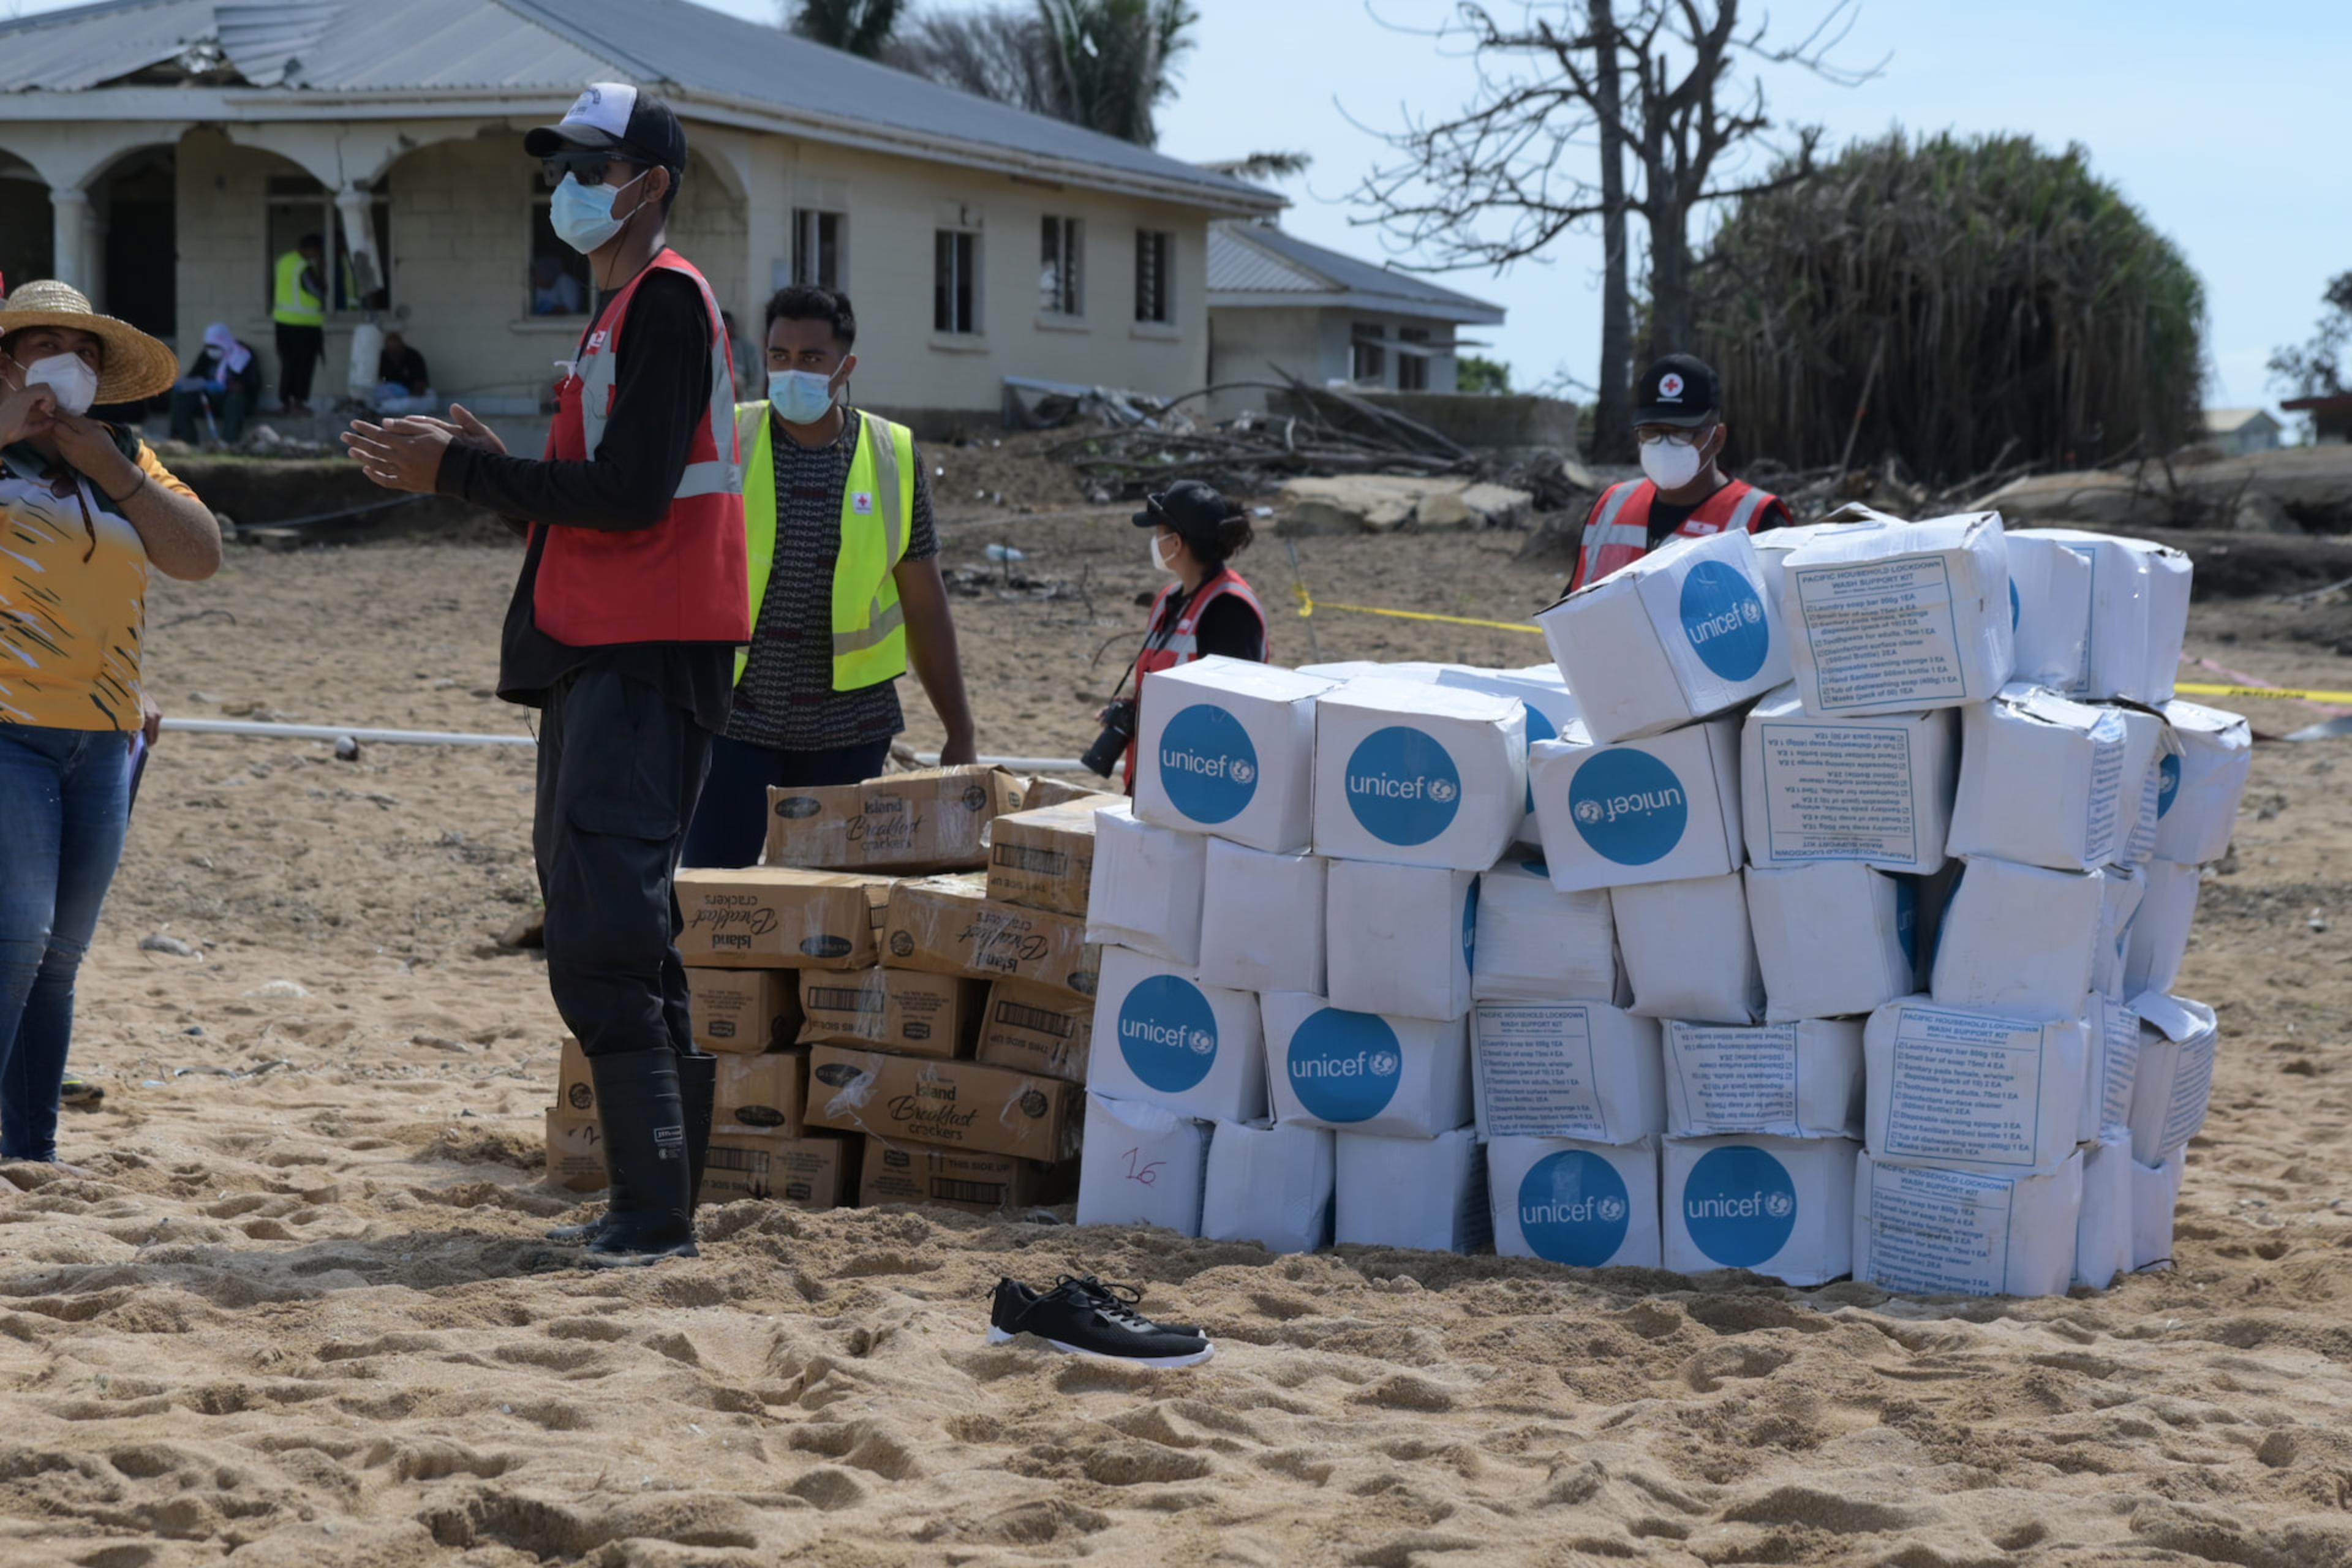 Amid COVID-19 restrictions in Tonga, supplies from UNICEF have been delivered to a beach on Nomuka Island through the Red Cross. © Tonga Red Cross Society 2022